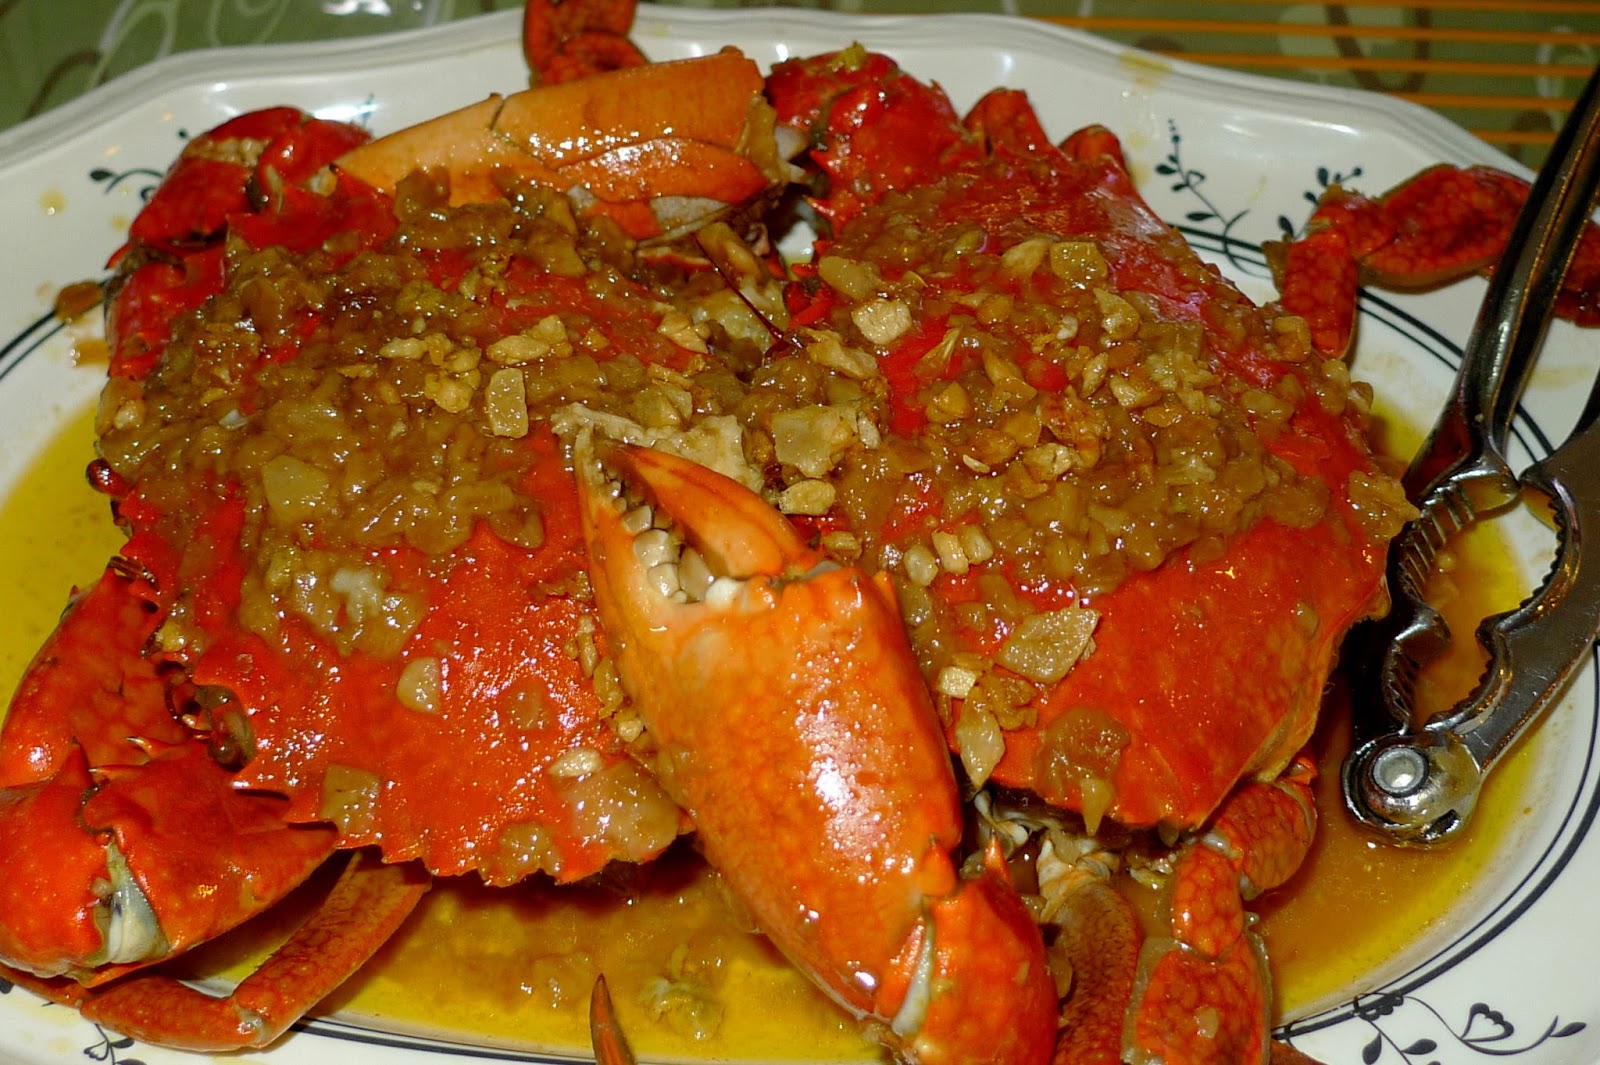 I AM A FOODIE: Dampa at Boracay